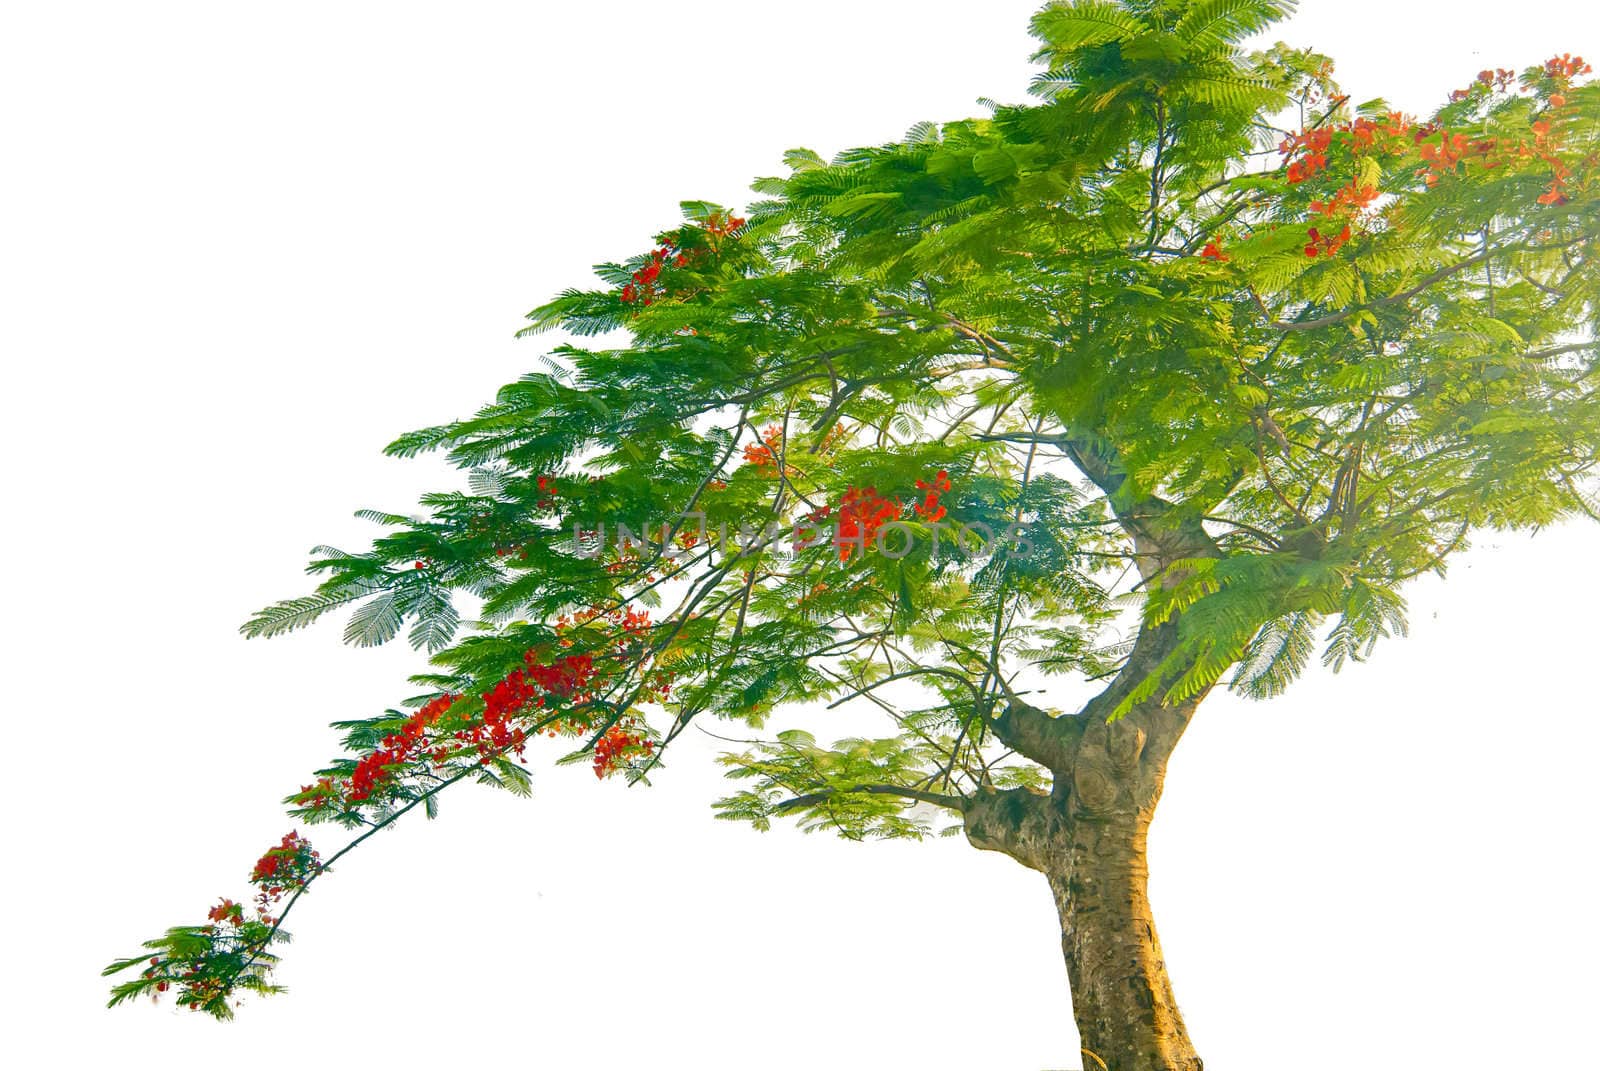 Royal poinciana isolated on white background by xfdly5